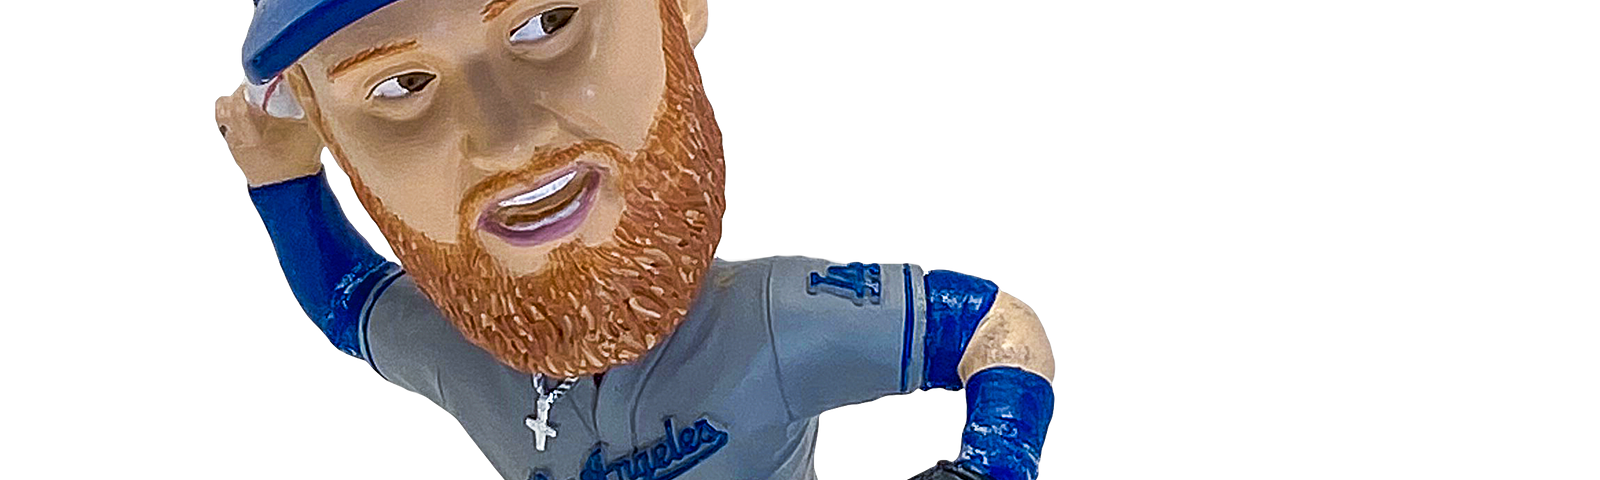 Dodgers to hold first-ever Digital Bobblehead Night Sept. 21, by Rowan  Kavner